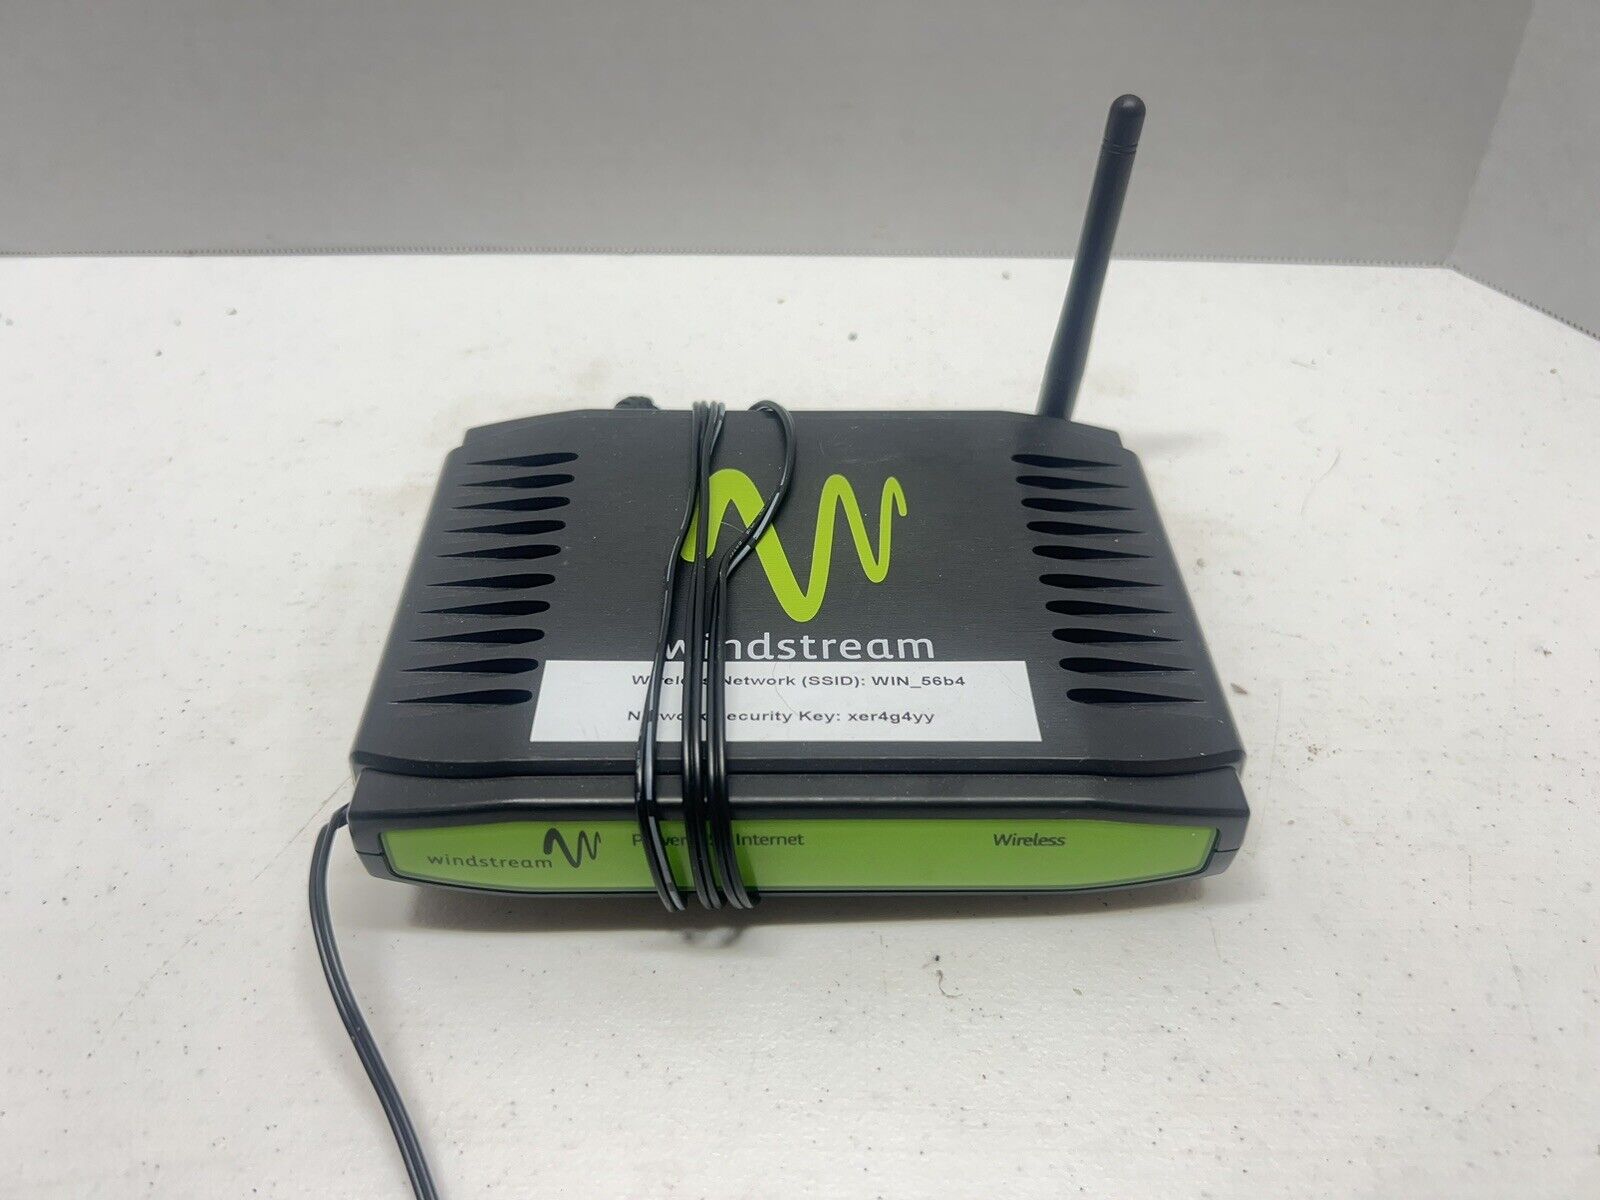 Windstream Sagemcom Fast Fast 1704N Wireless ADSL Router - Ships Today